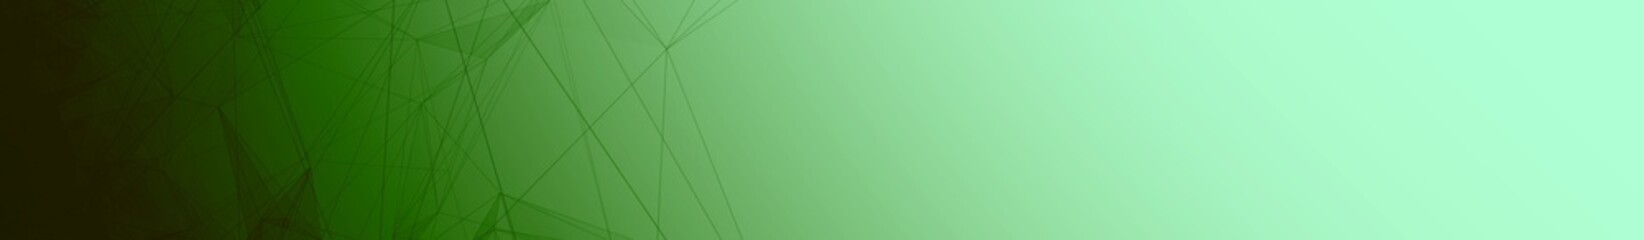 Green white gradient wide web banner background. Fantasy abstract technology, engineering and science wallpaper with particles and plexus connected lines. Wireframe 3D illustration and copy space